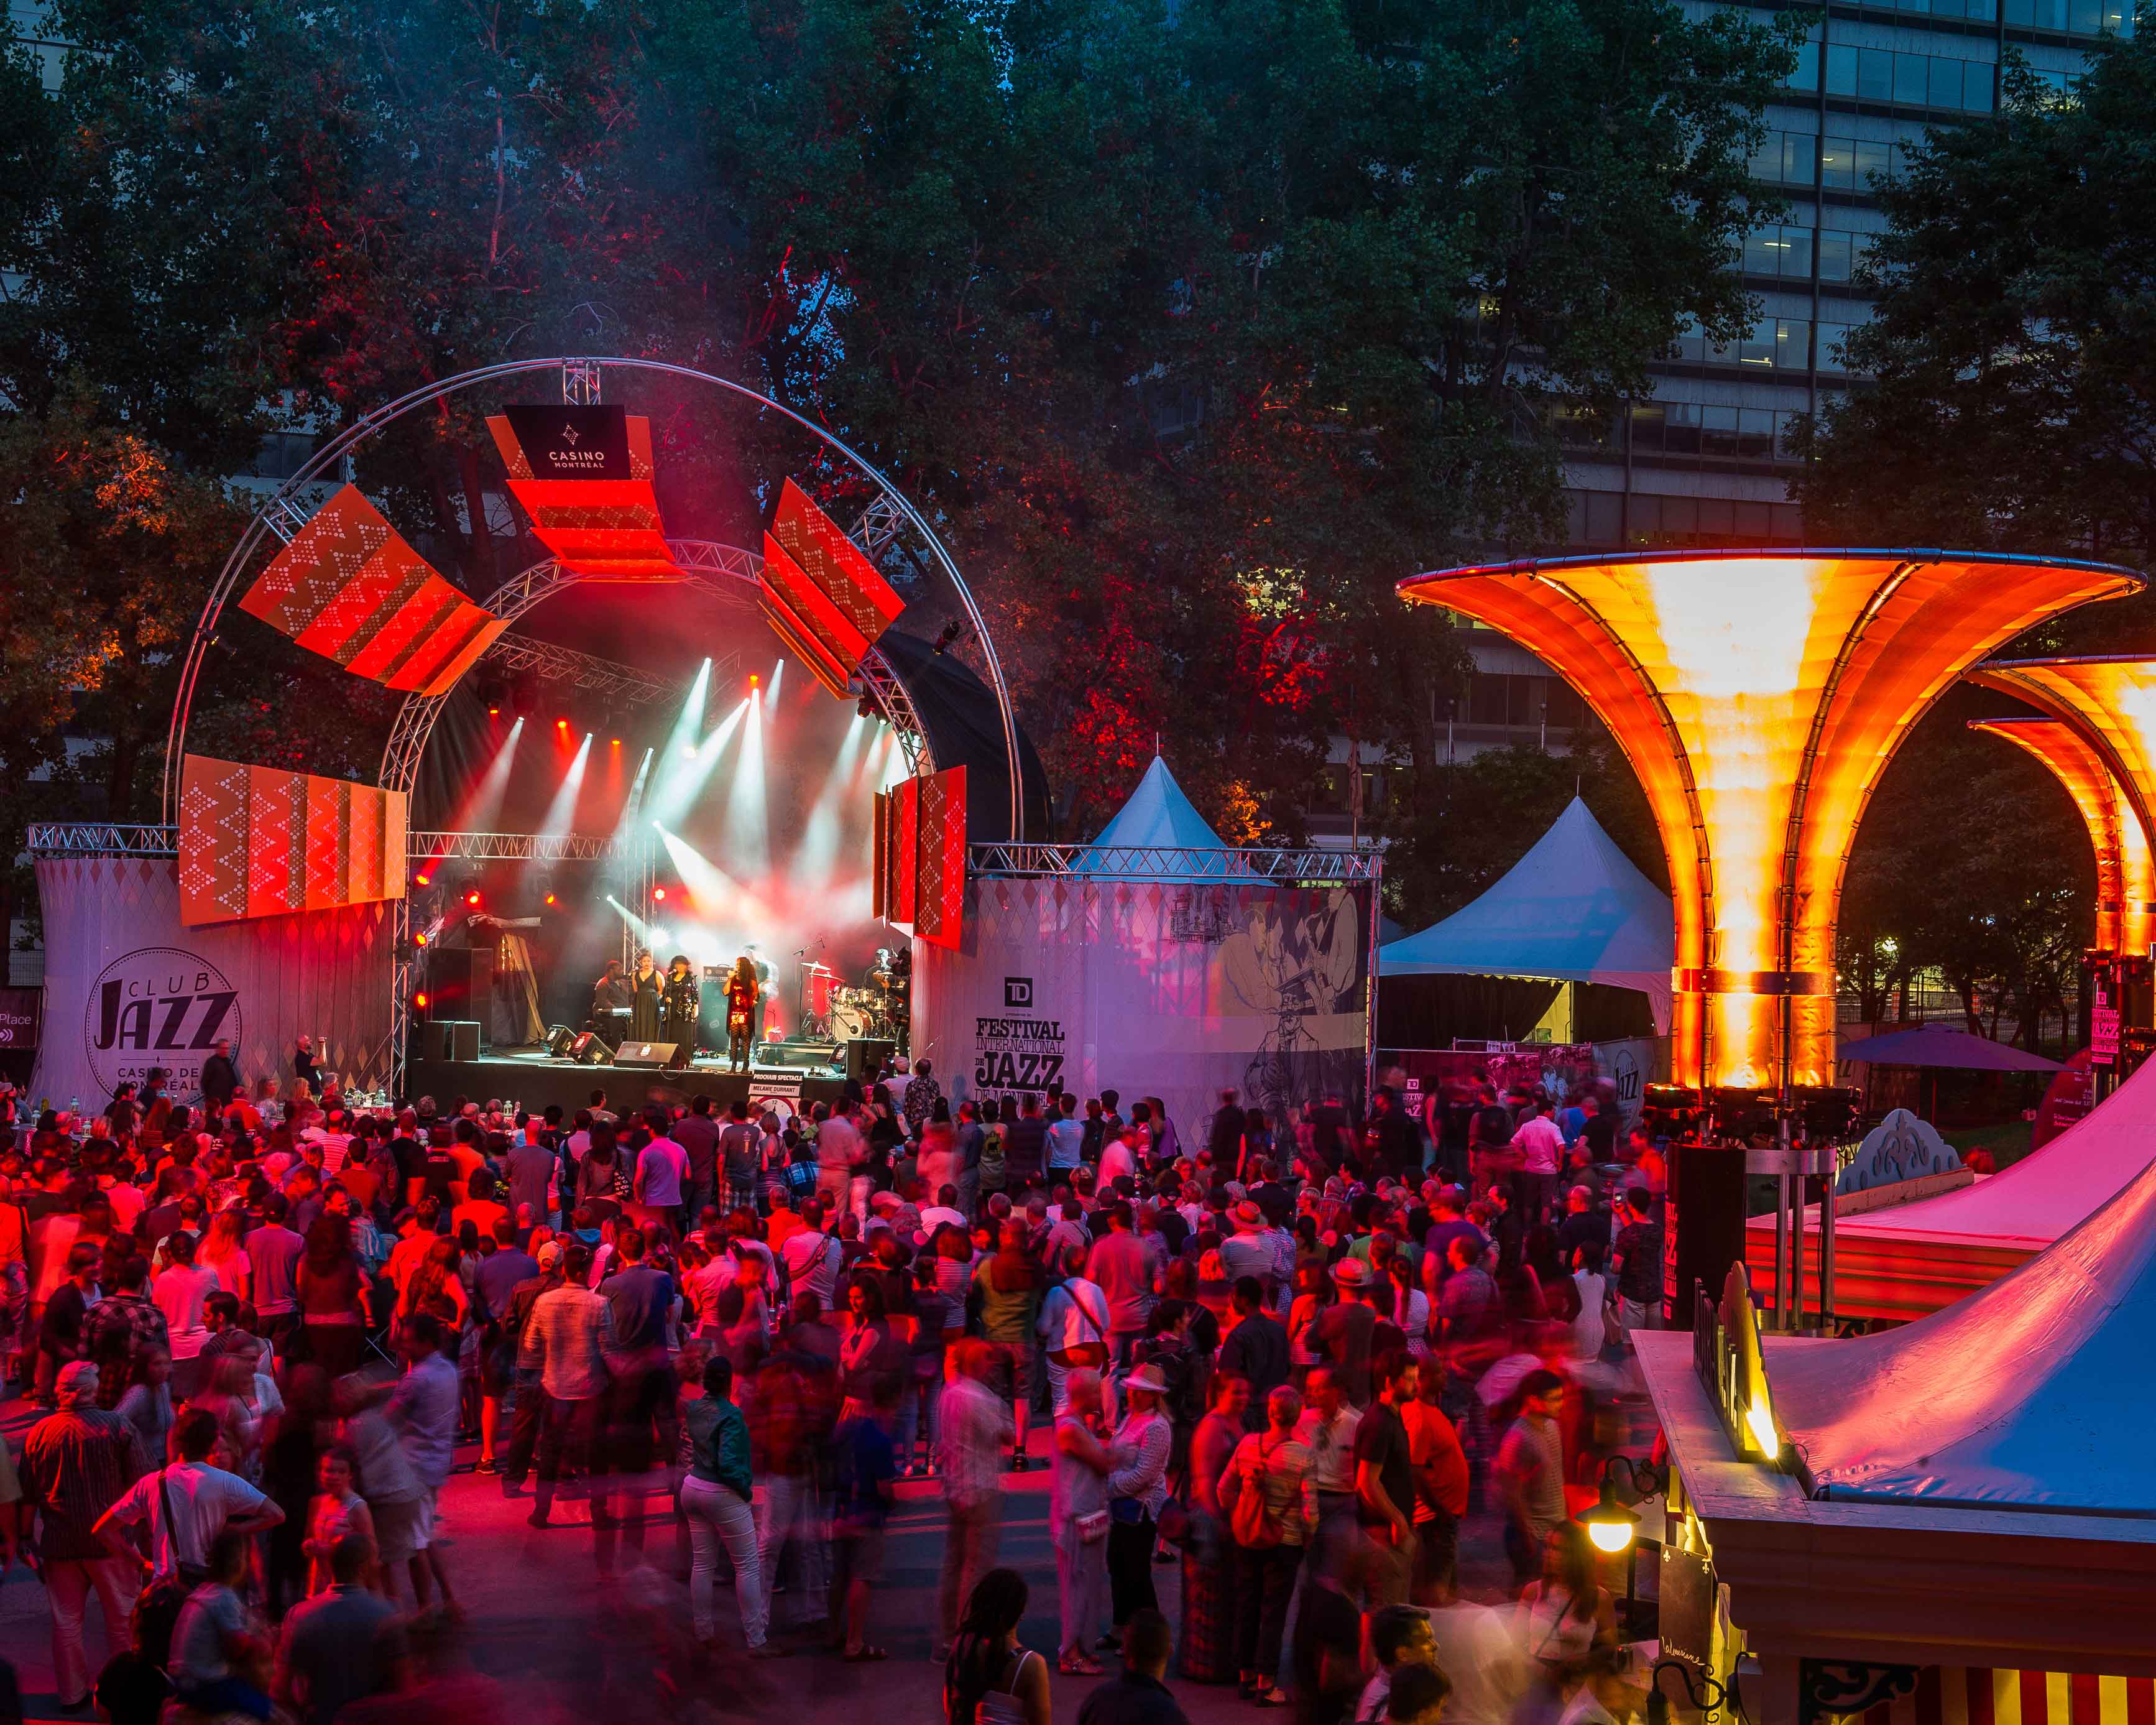 Montreal Travel Guide: a lit up stage performing to crowds of people.